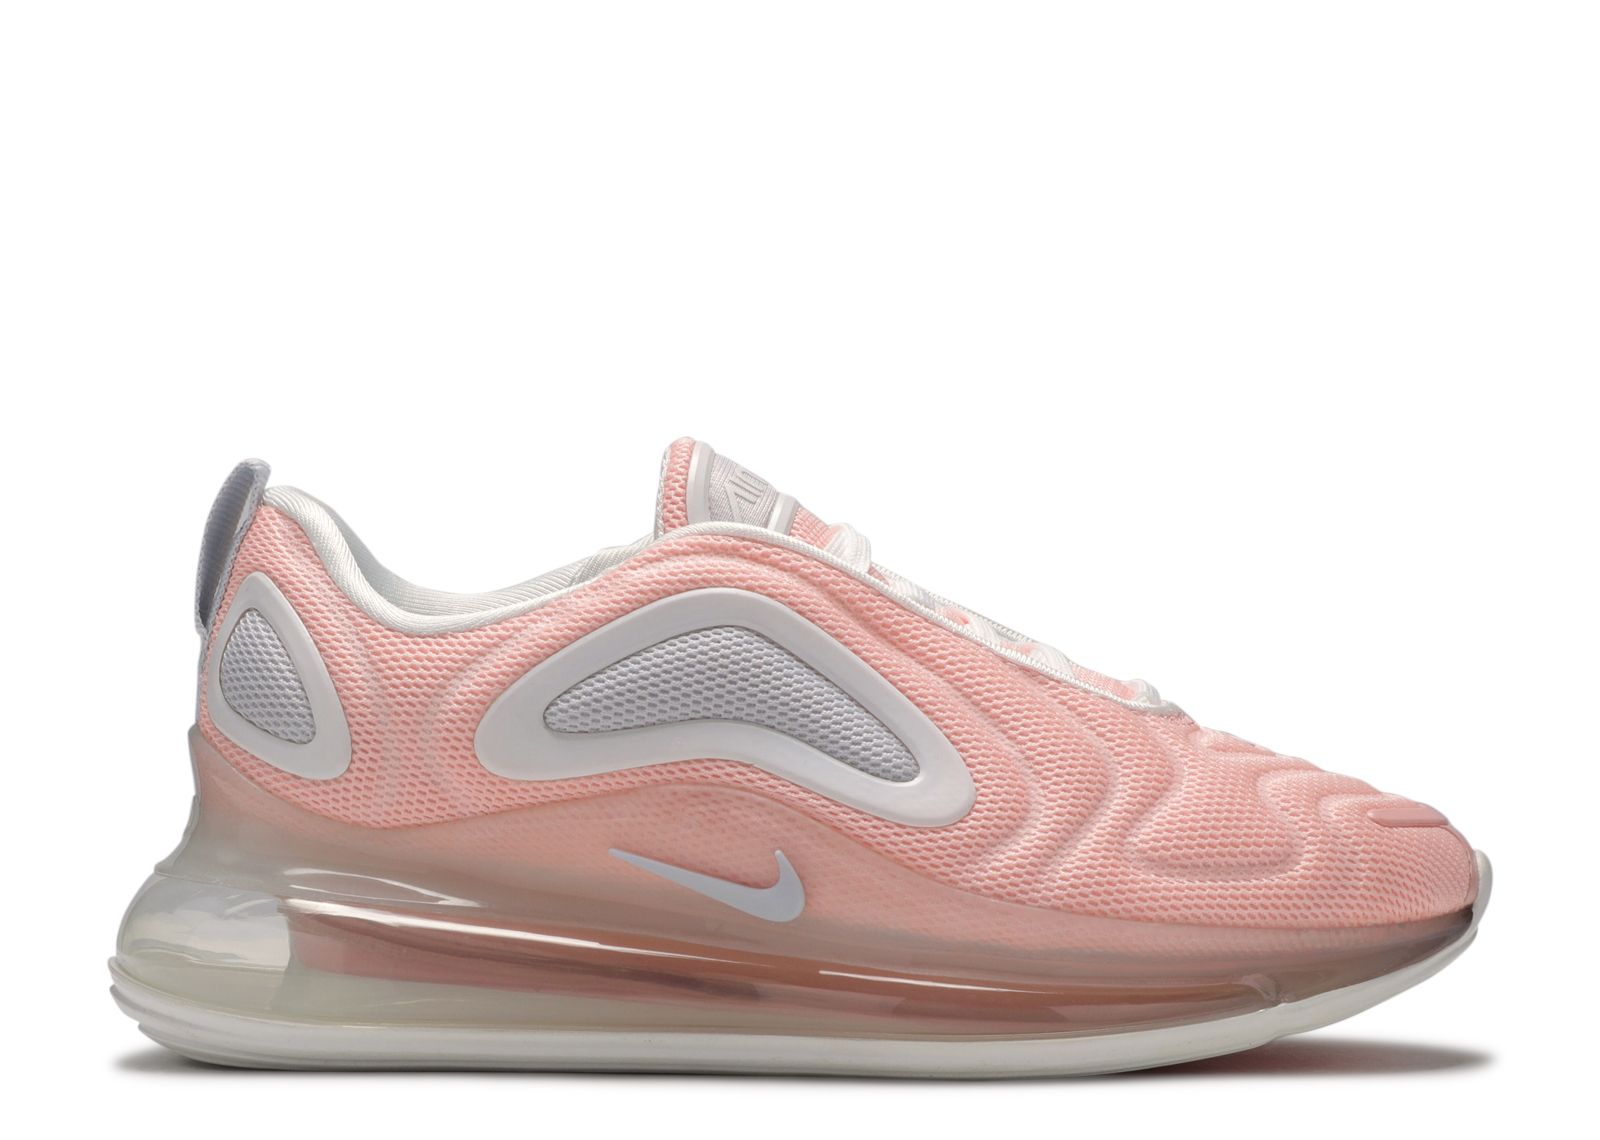 Кроссовки Nike Wmns Air Max 720 'Bleached Coral', розовый exfo maxtester carring bag ftb 1 ftb 150 max 710 max 720 max 730c max 715b max 710b m1 otdr bags package